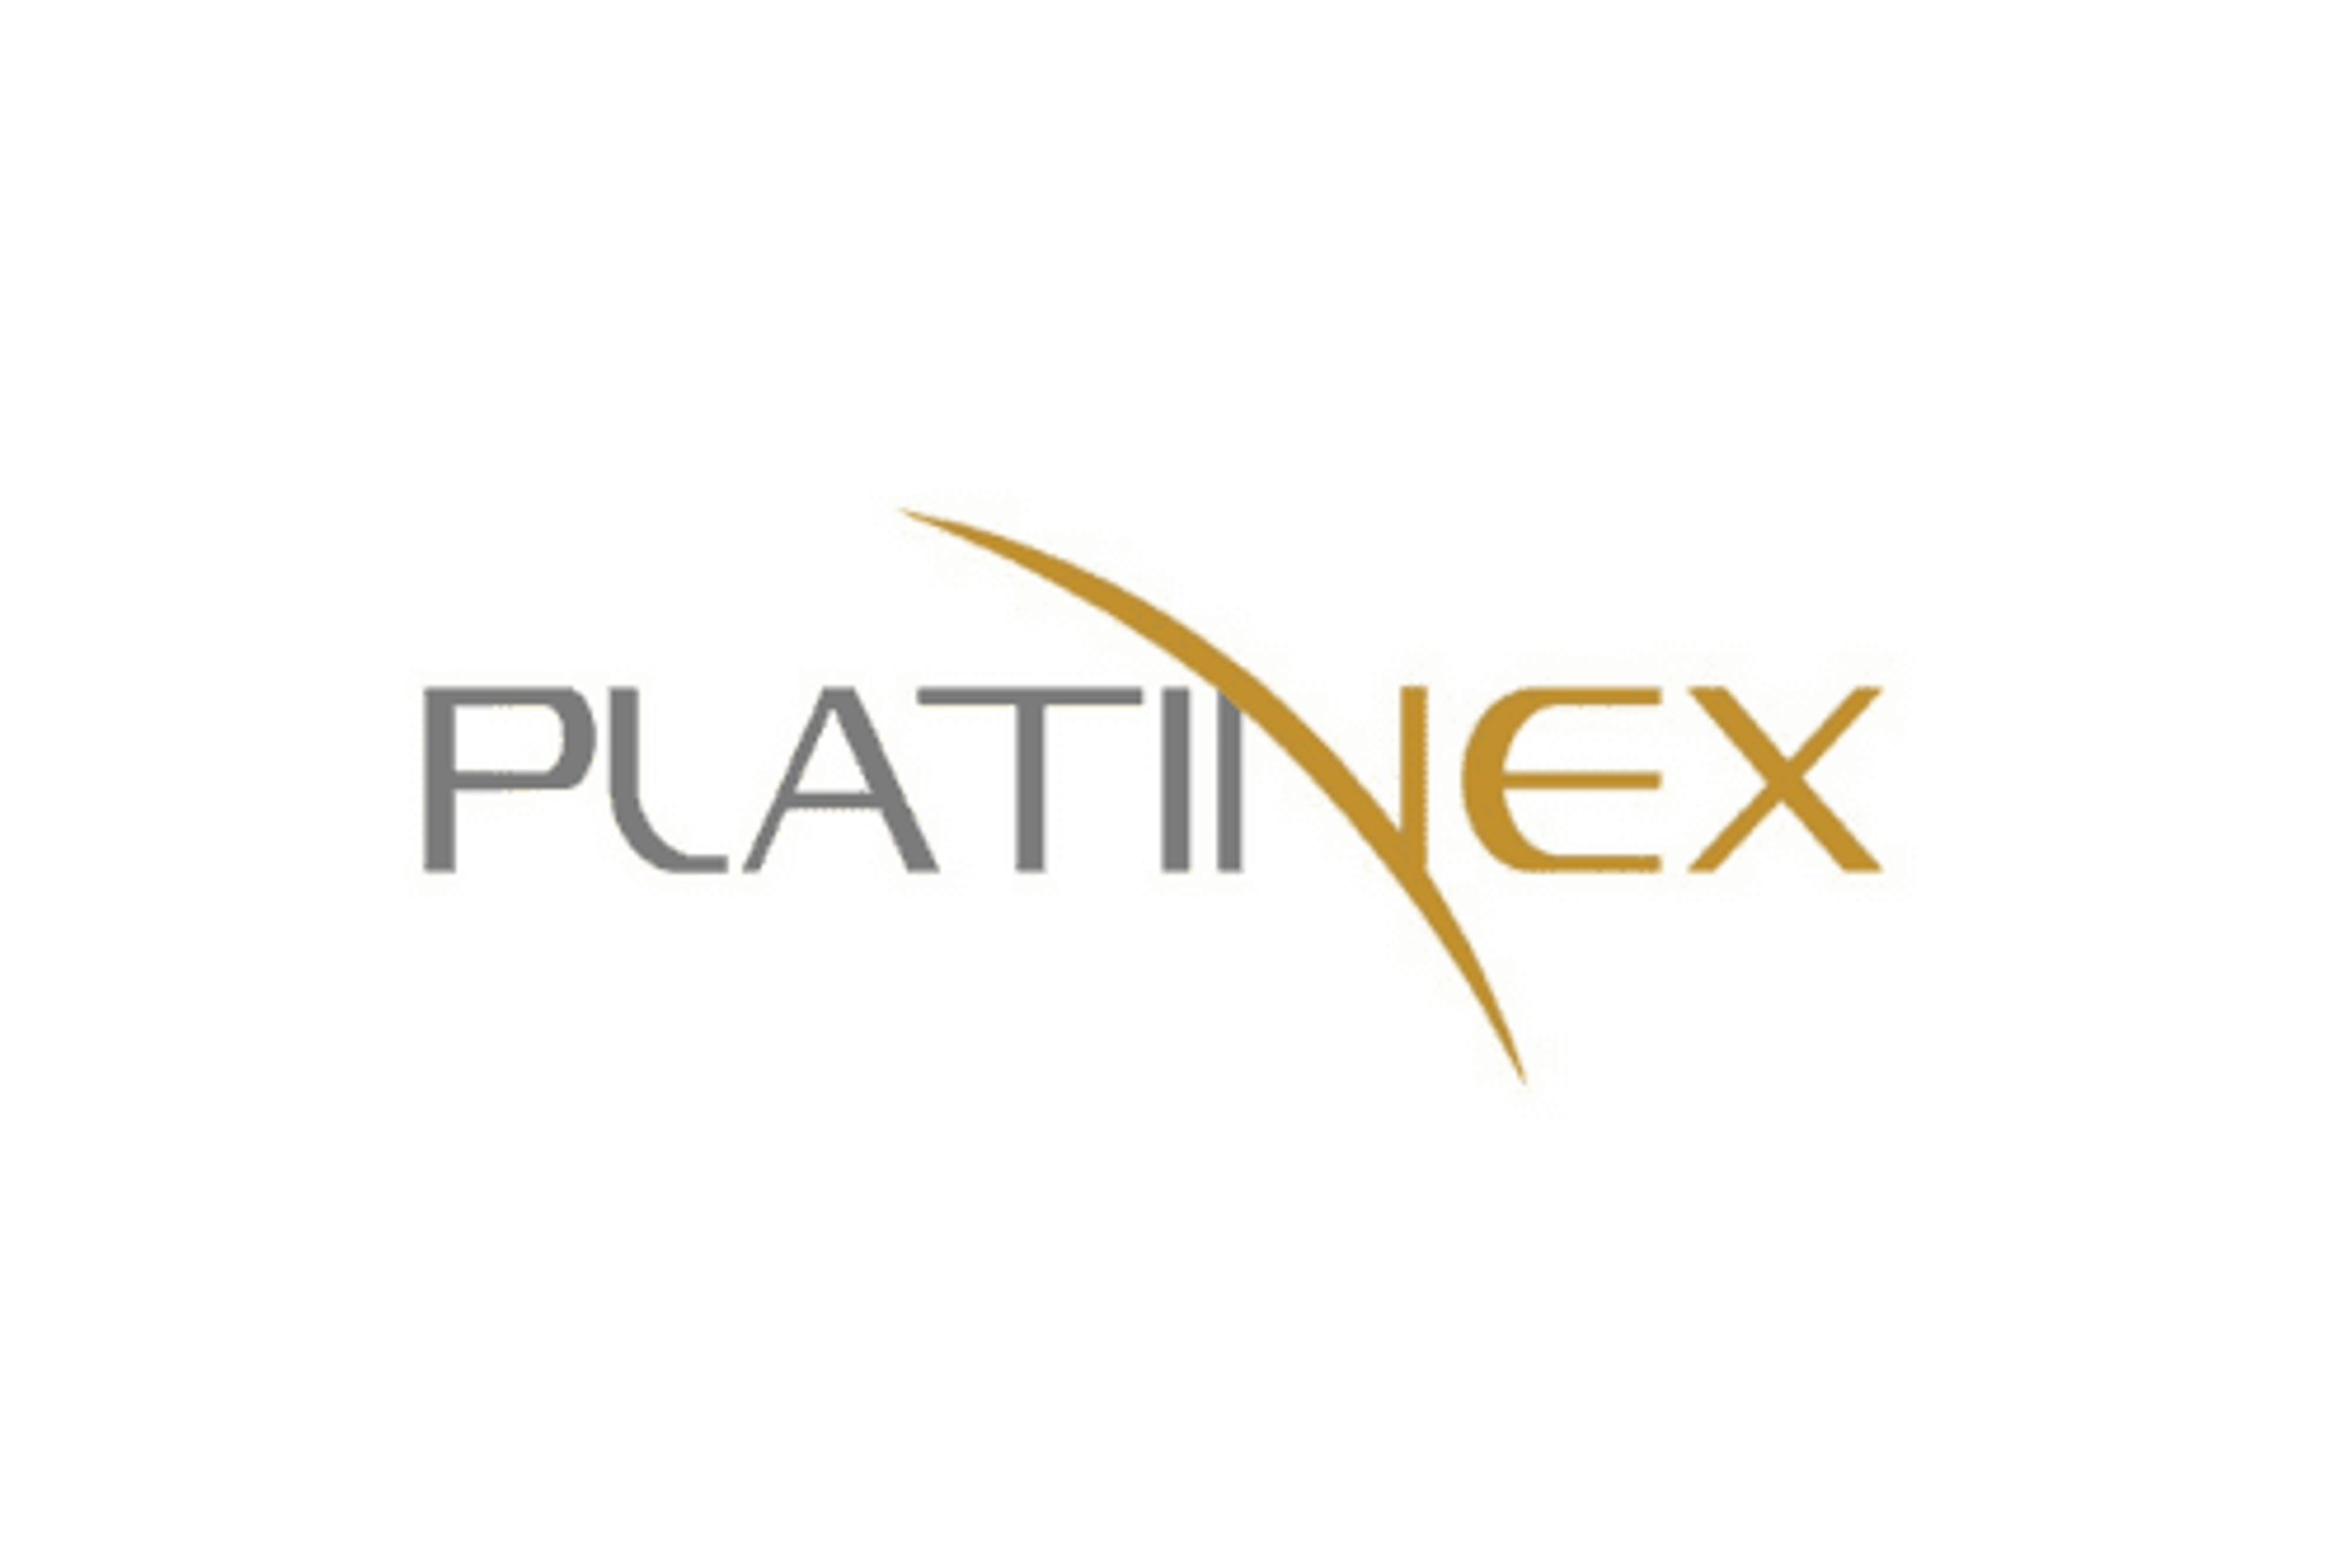 Platinex Announces Closing of Private Placement